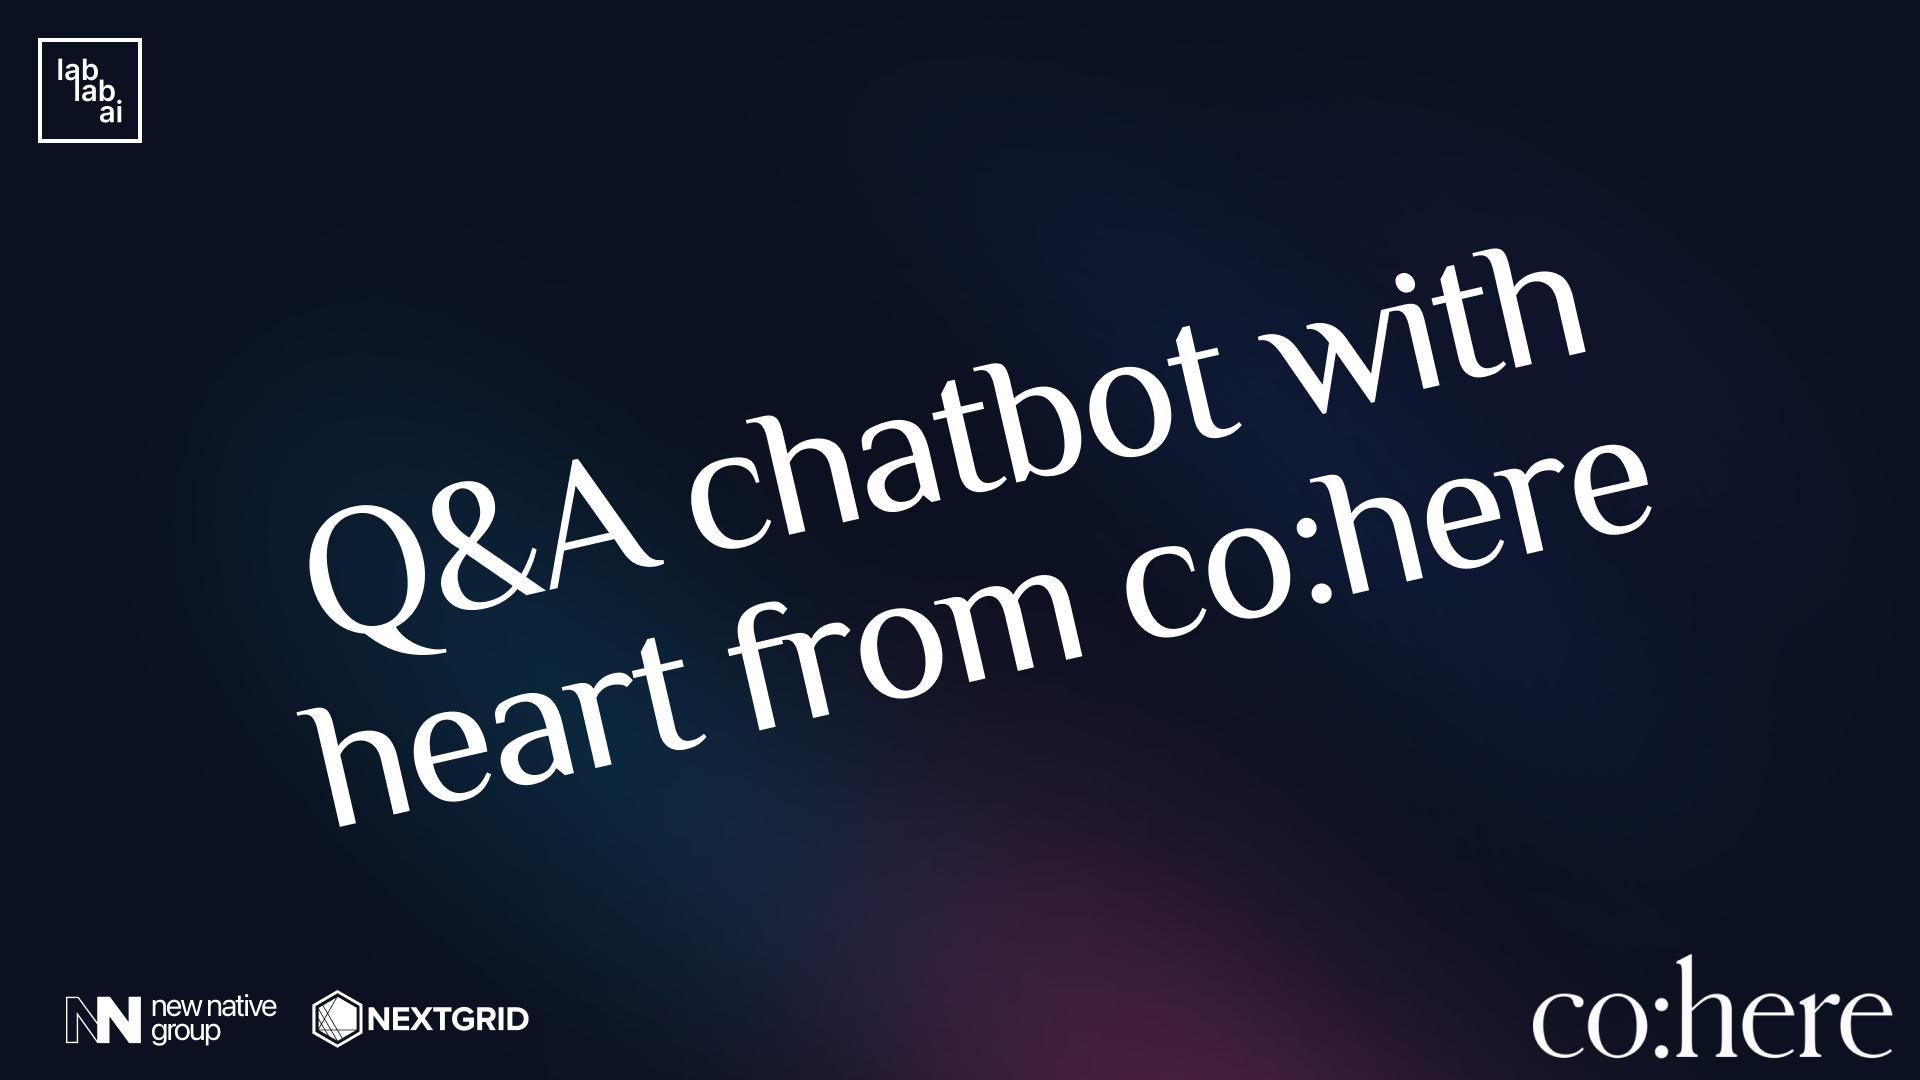 Q&A chatbot with heart from cohere tutorial